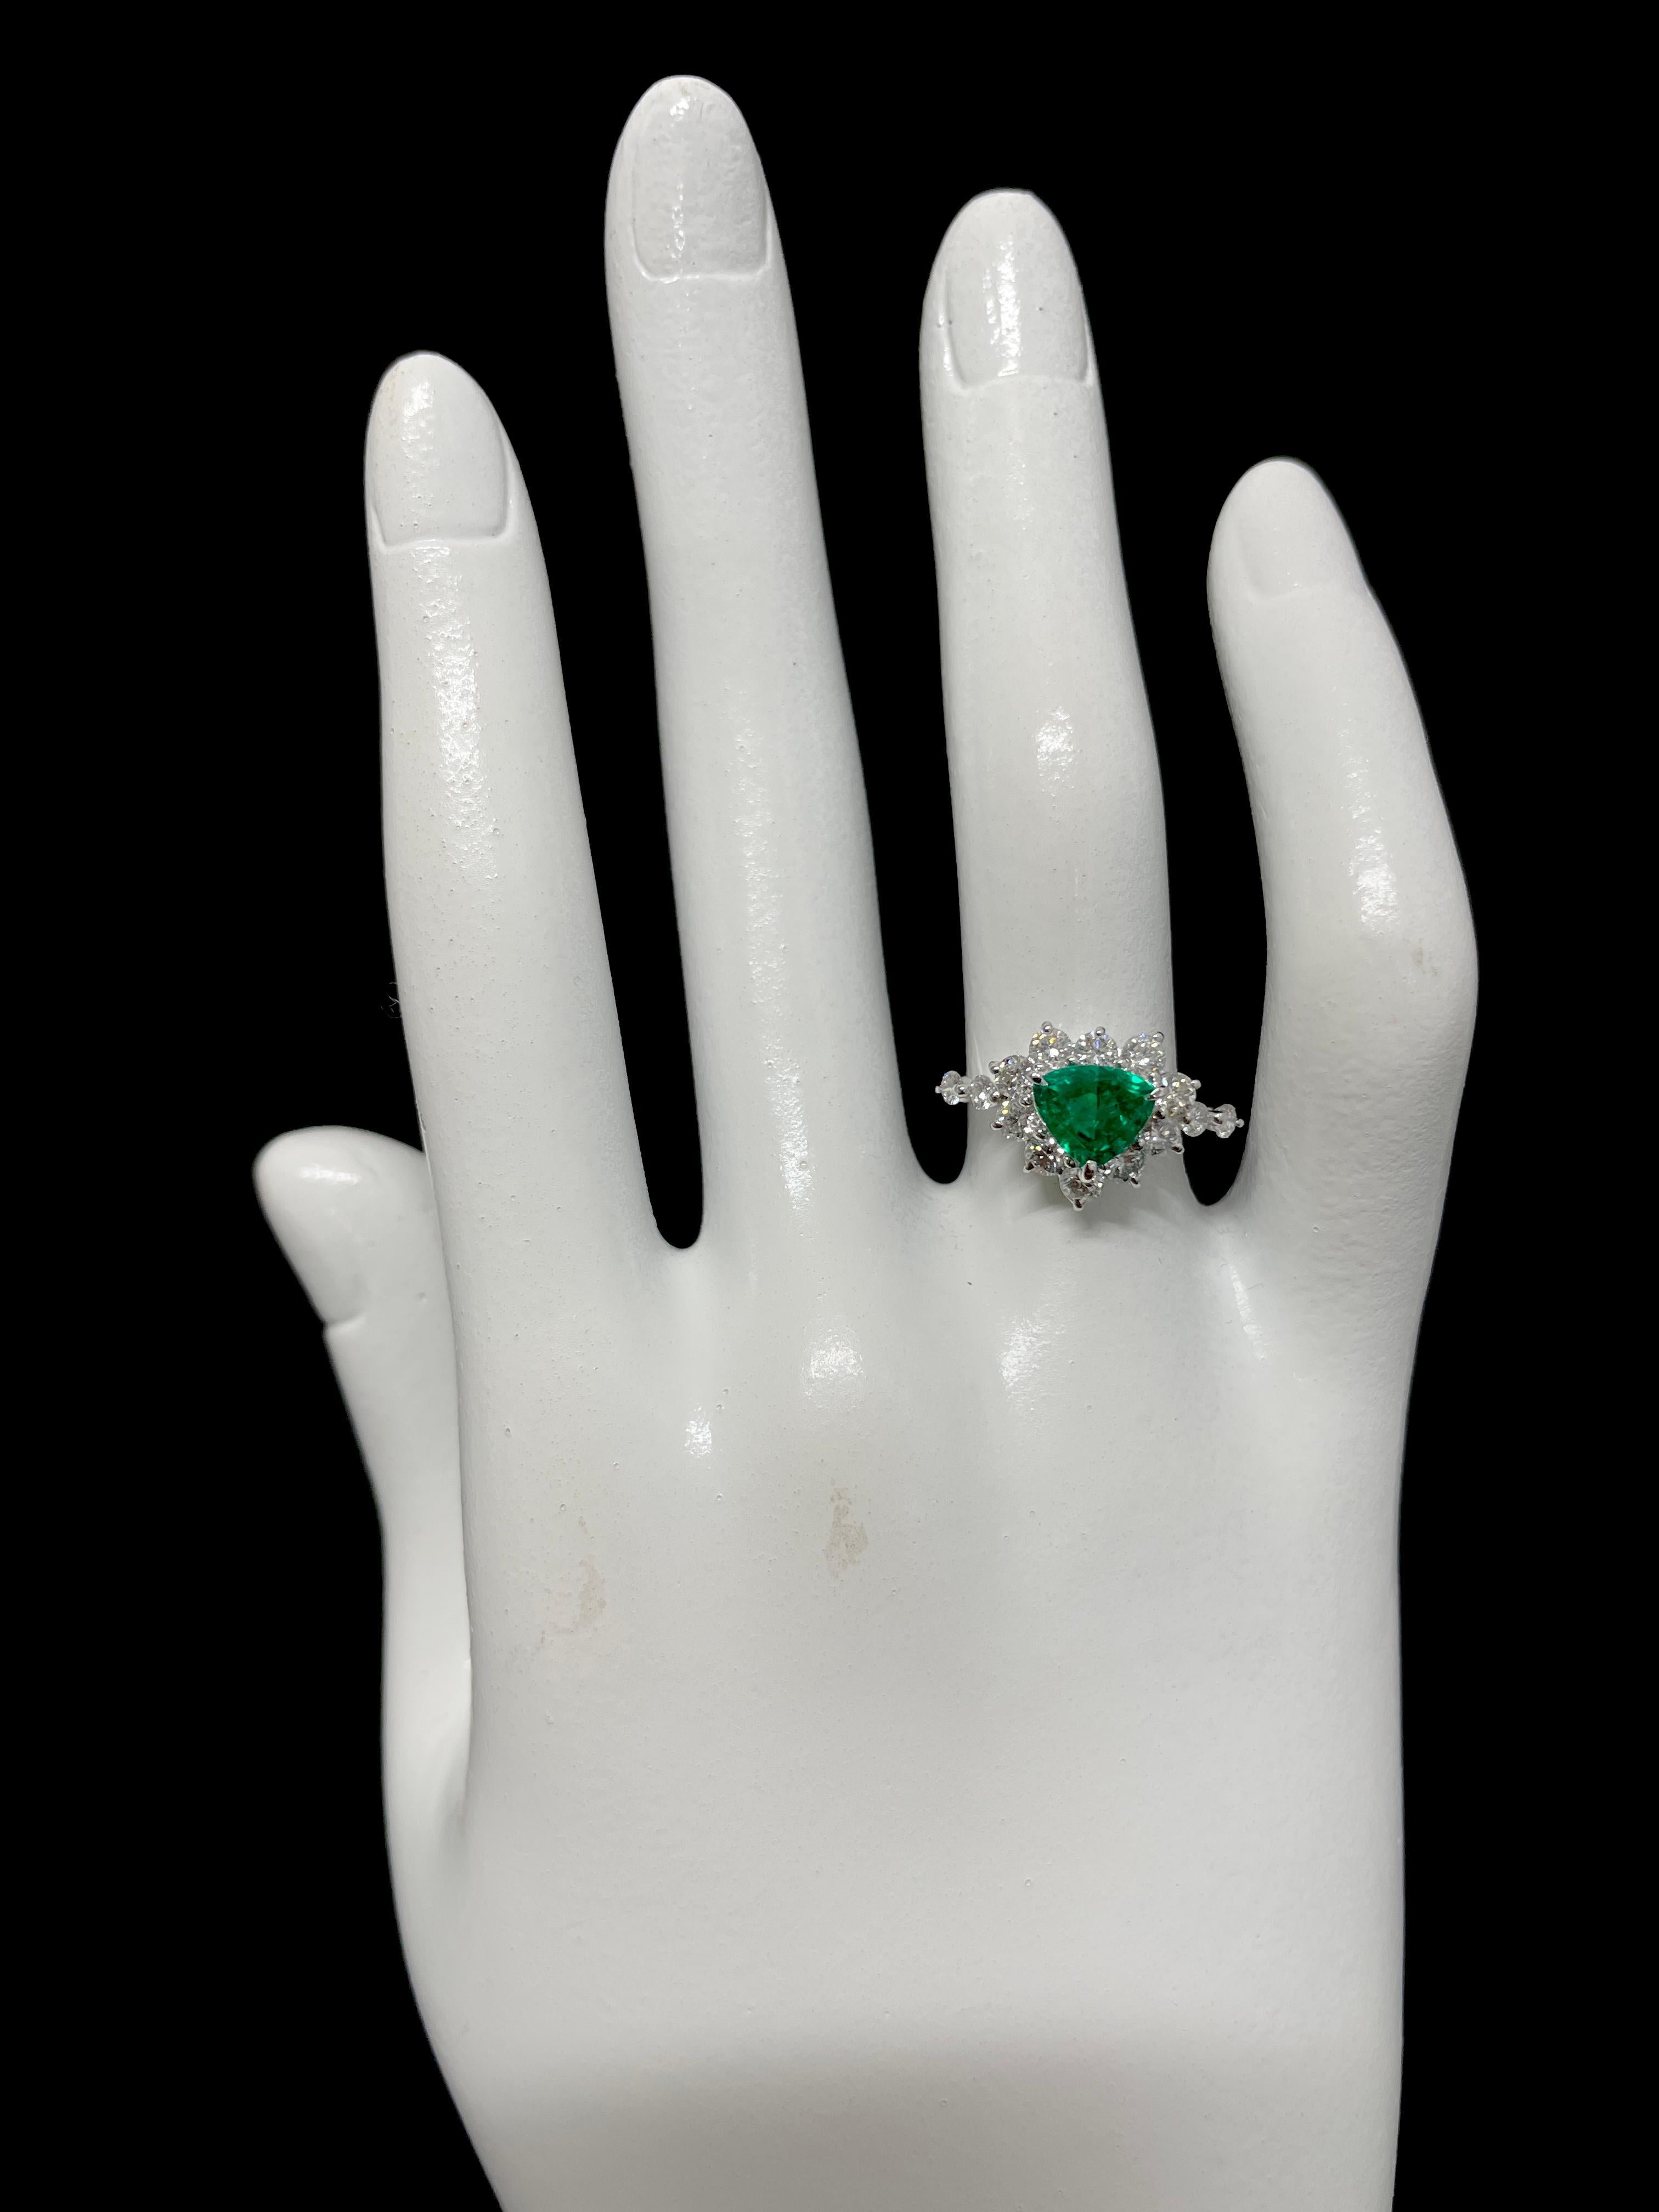  0.83 Carat Natural, Trillion Cut Emerald and Diamond Ring Set in Platinum For Sale 2